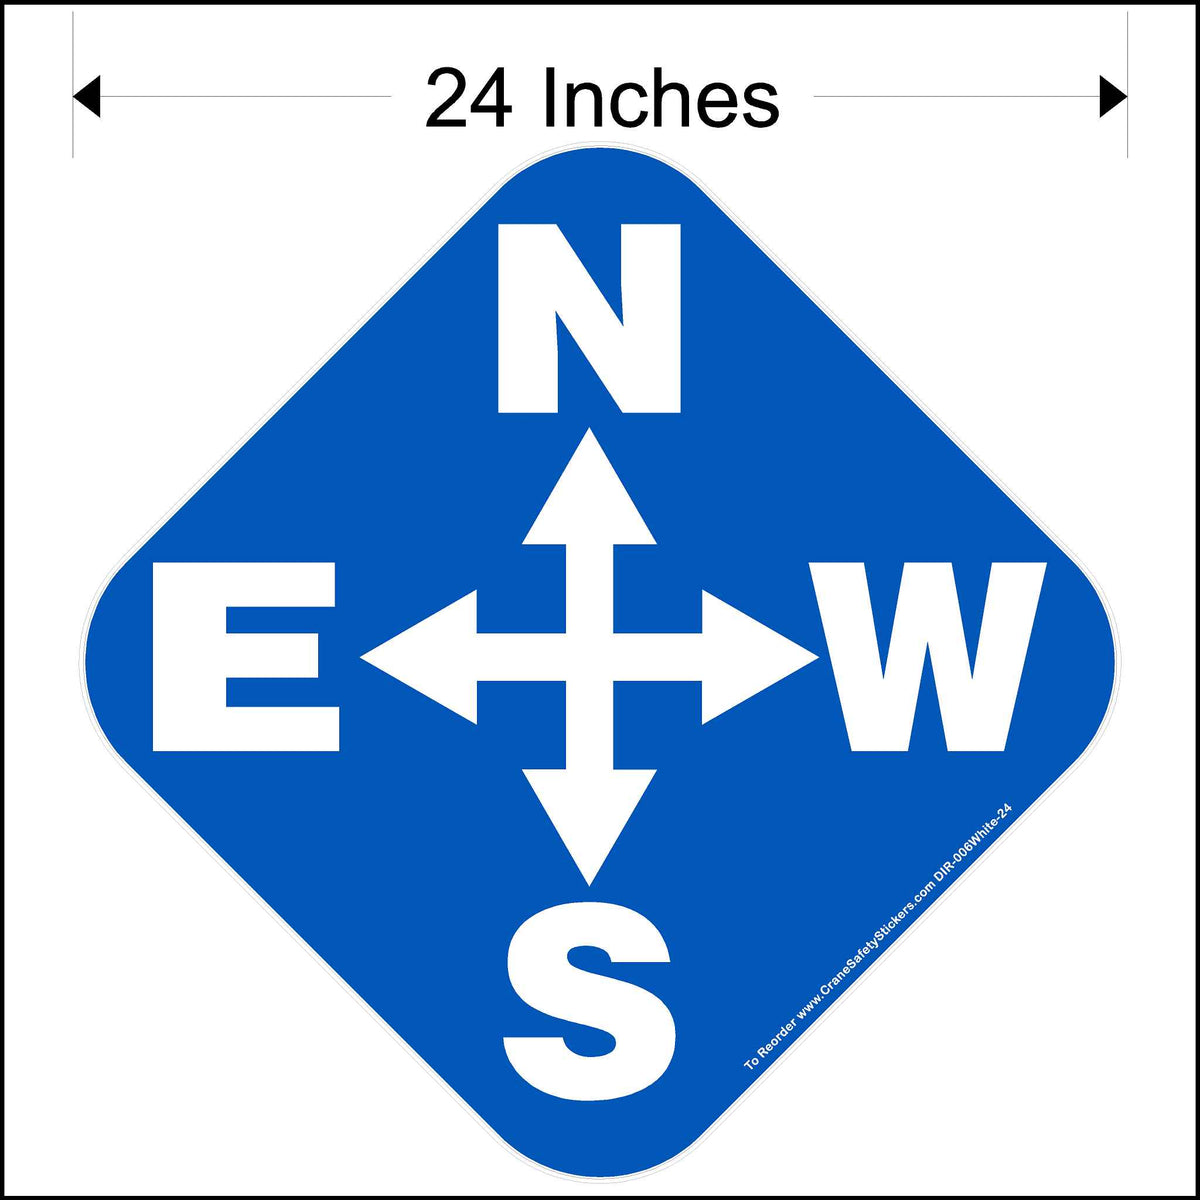 Overhead directional crane decal with white lettering and blue background. Decal size is 24 inches square.